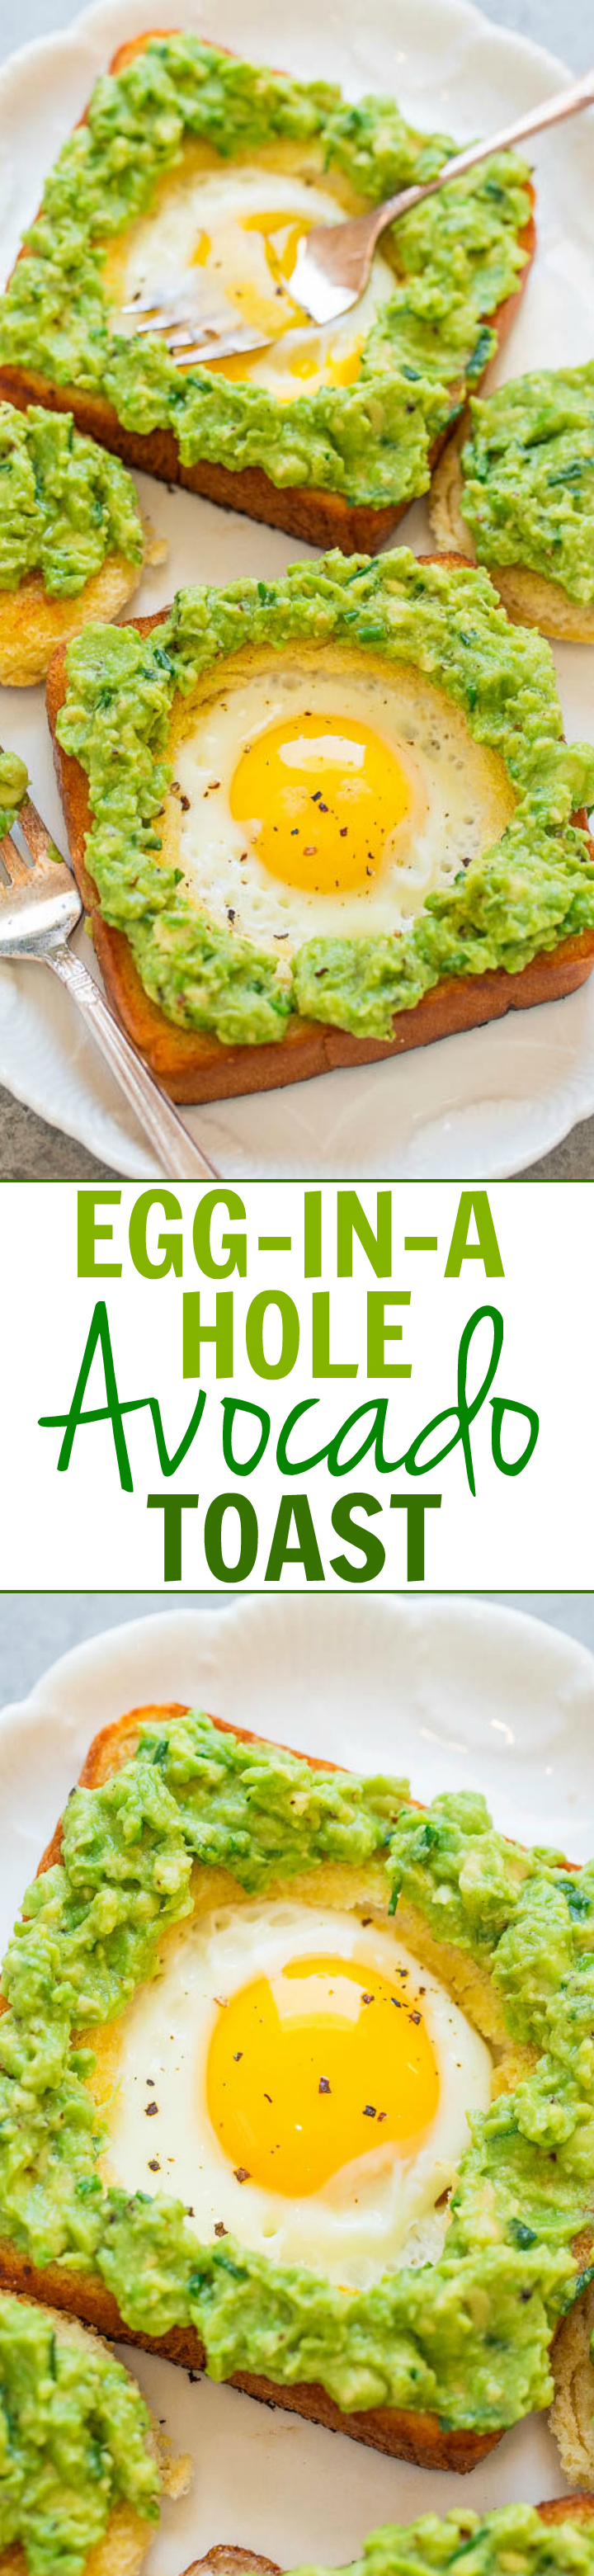 Egg-in-a-Hole Avocado Toast — Slathering warm egg in a hole toast with a creamy chive and lime-scented avocado spread is beyond DELICIOUS!! This avocado toast with egg is EASY, ready in 15 minutes, and perfect ANYTIME!!